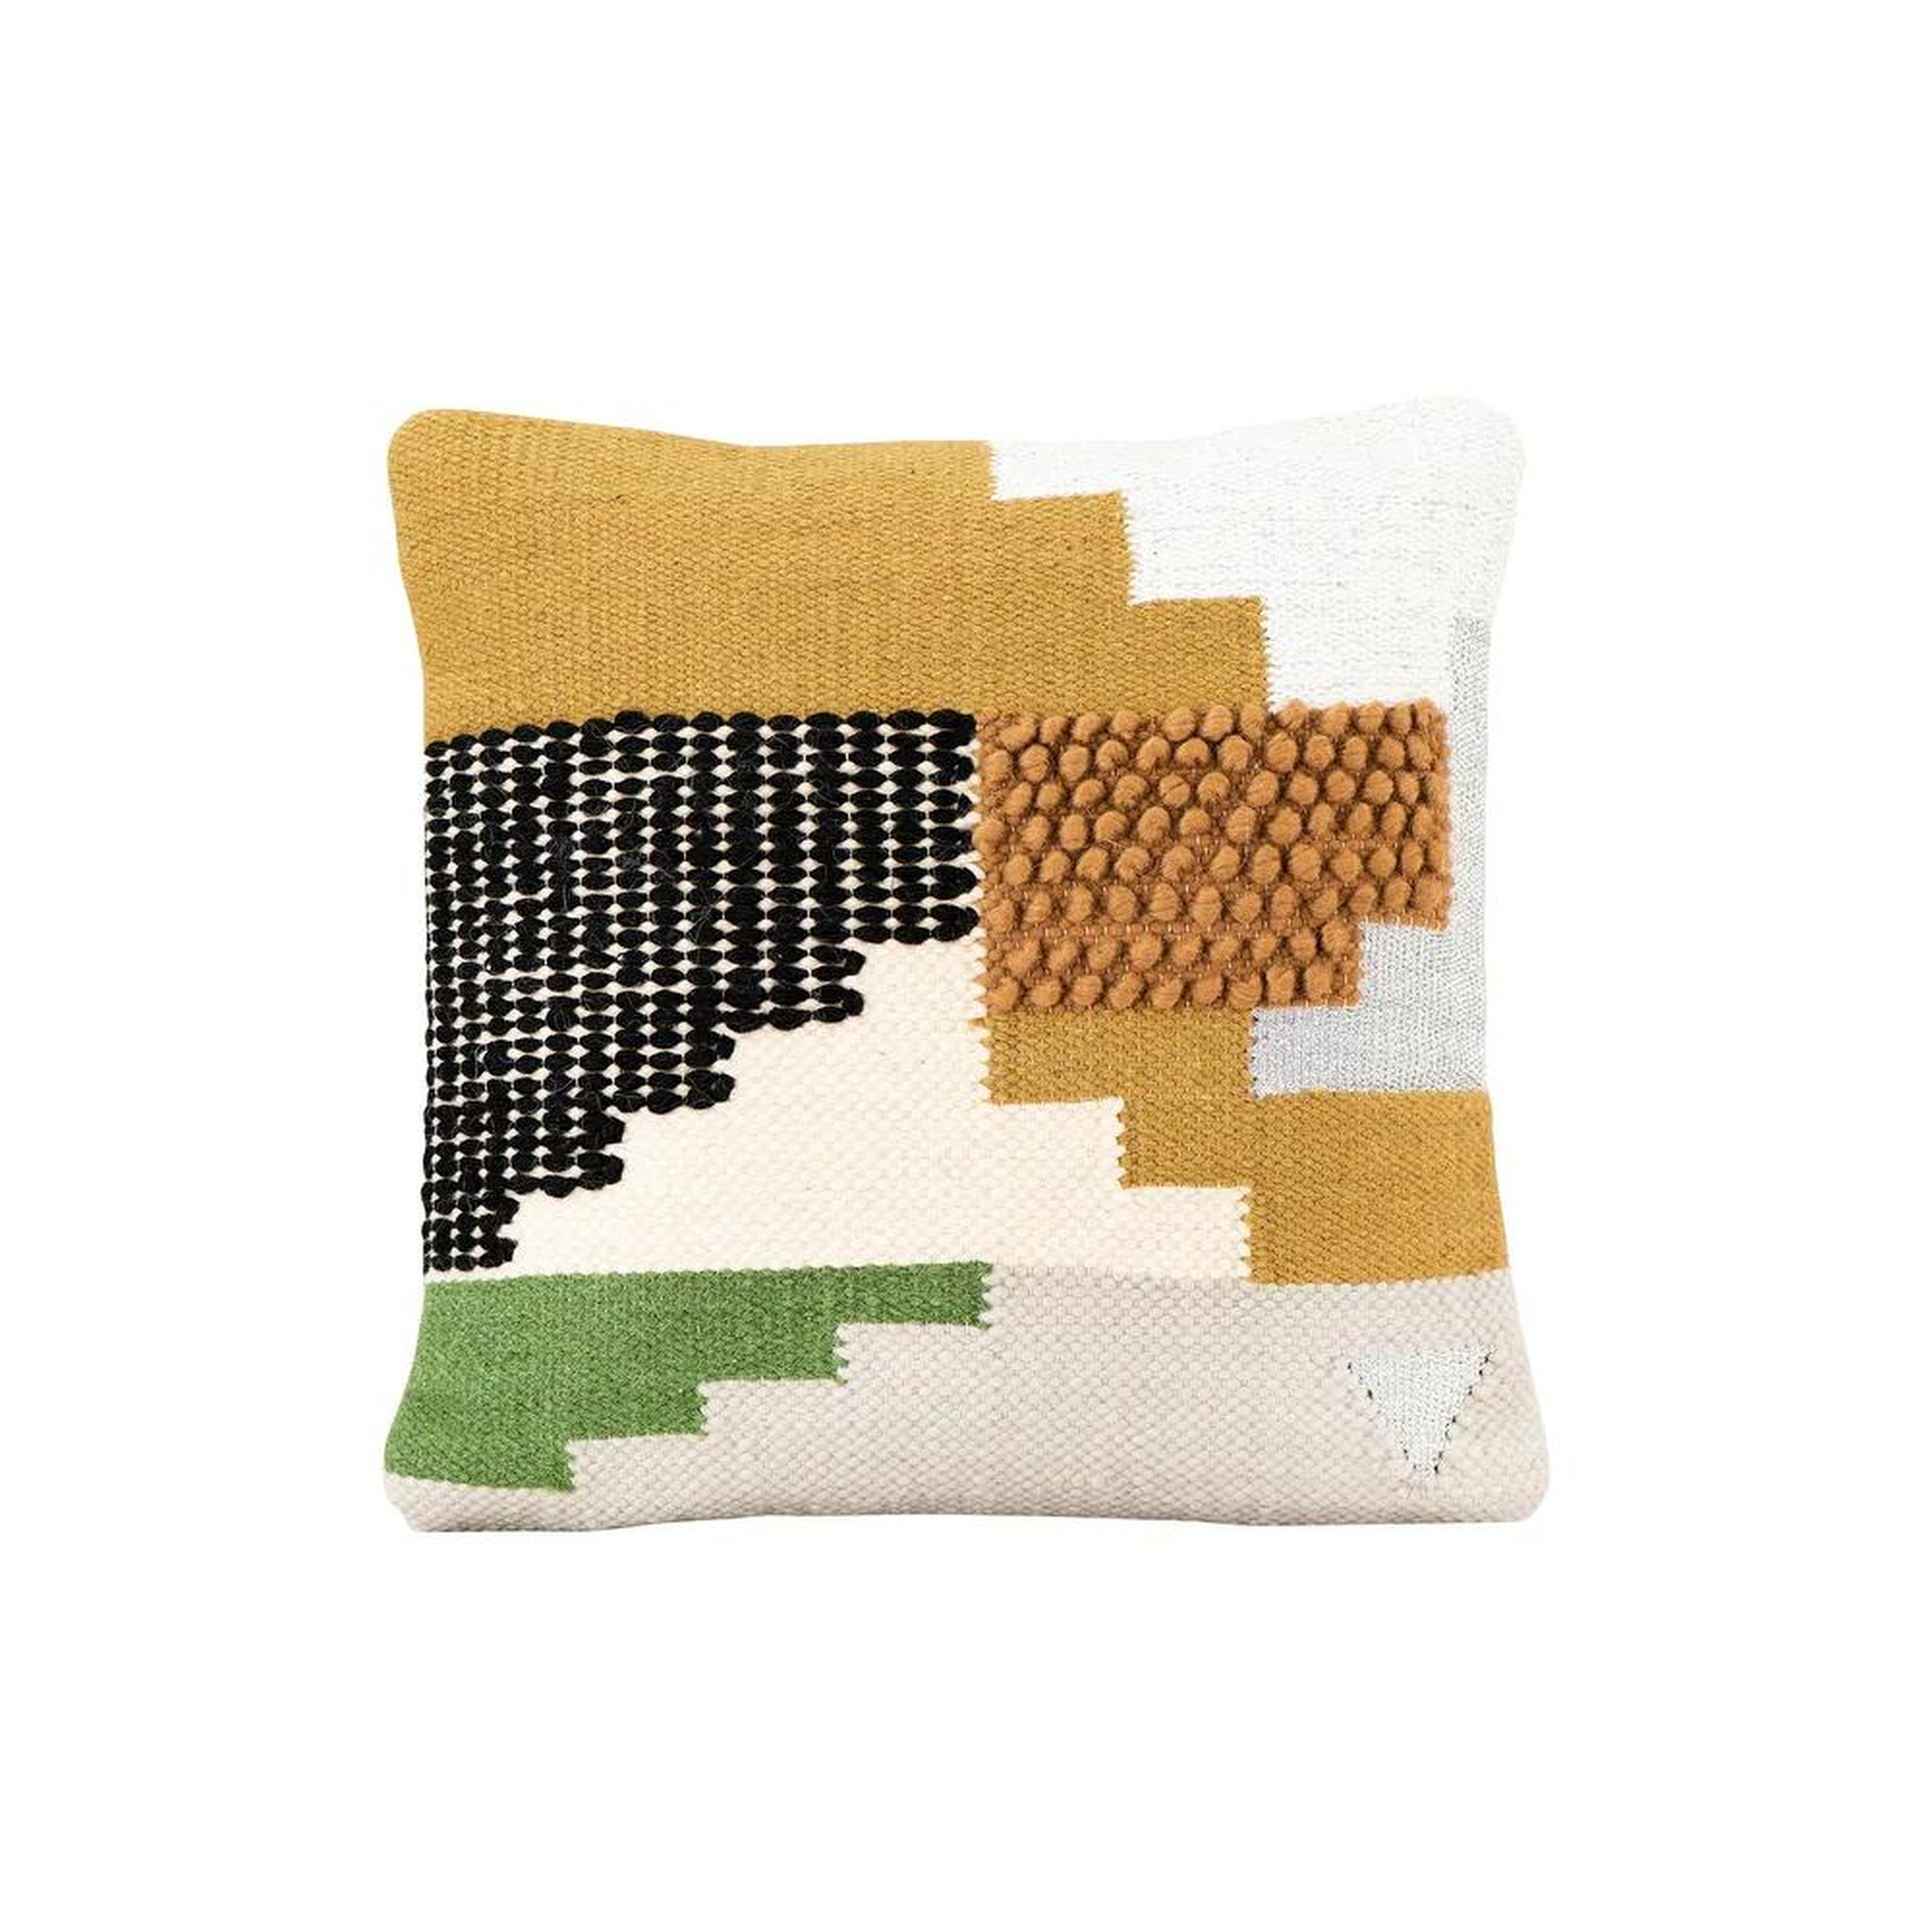 Handwoven Wool Kilim Pillow, White, Yellow, Green & Black, 20" x 20" - Nomad Home